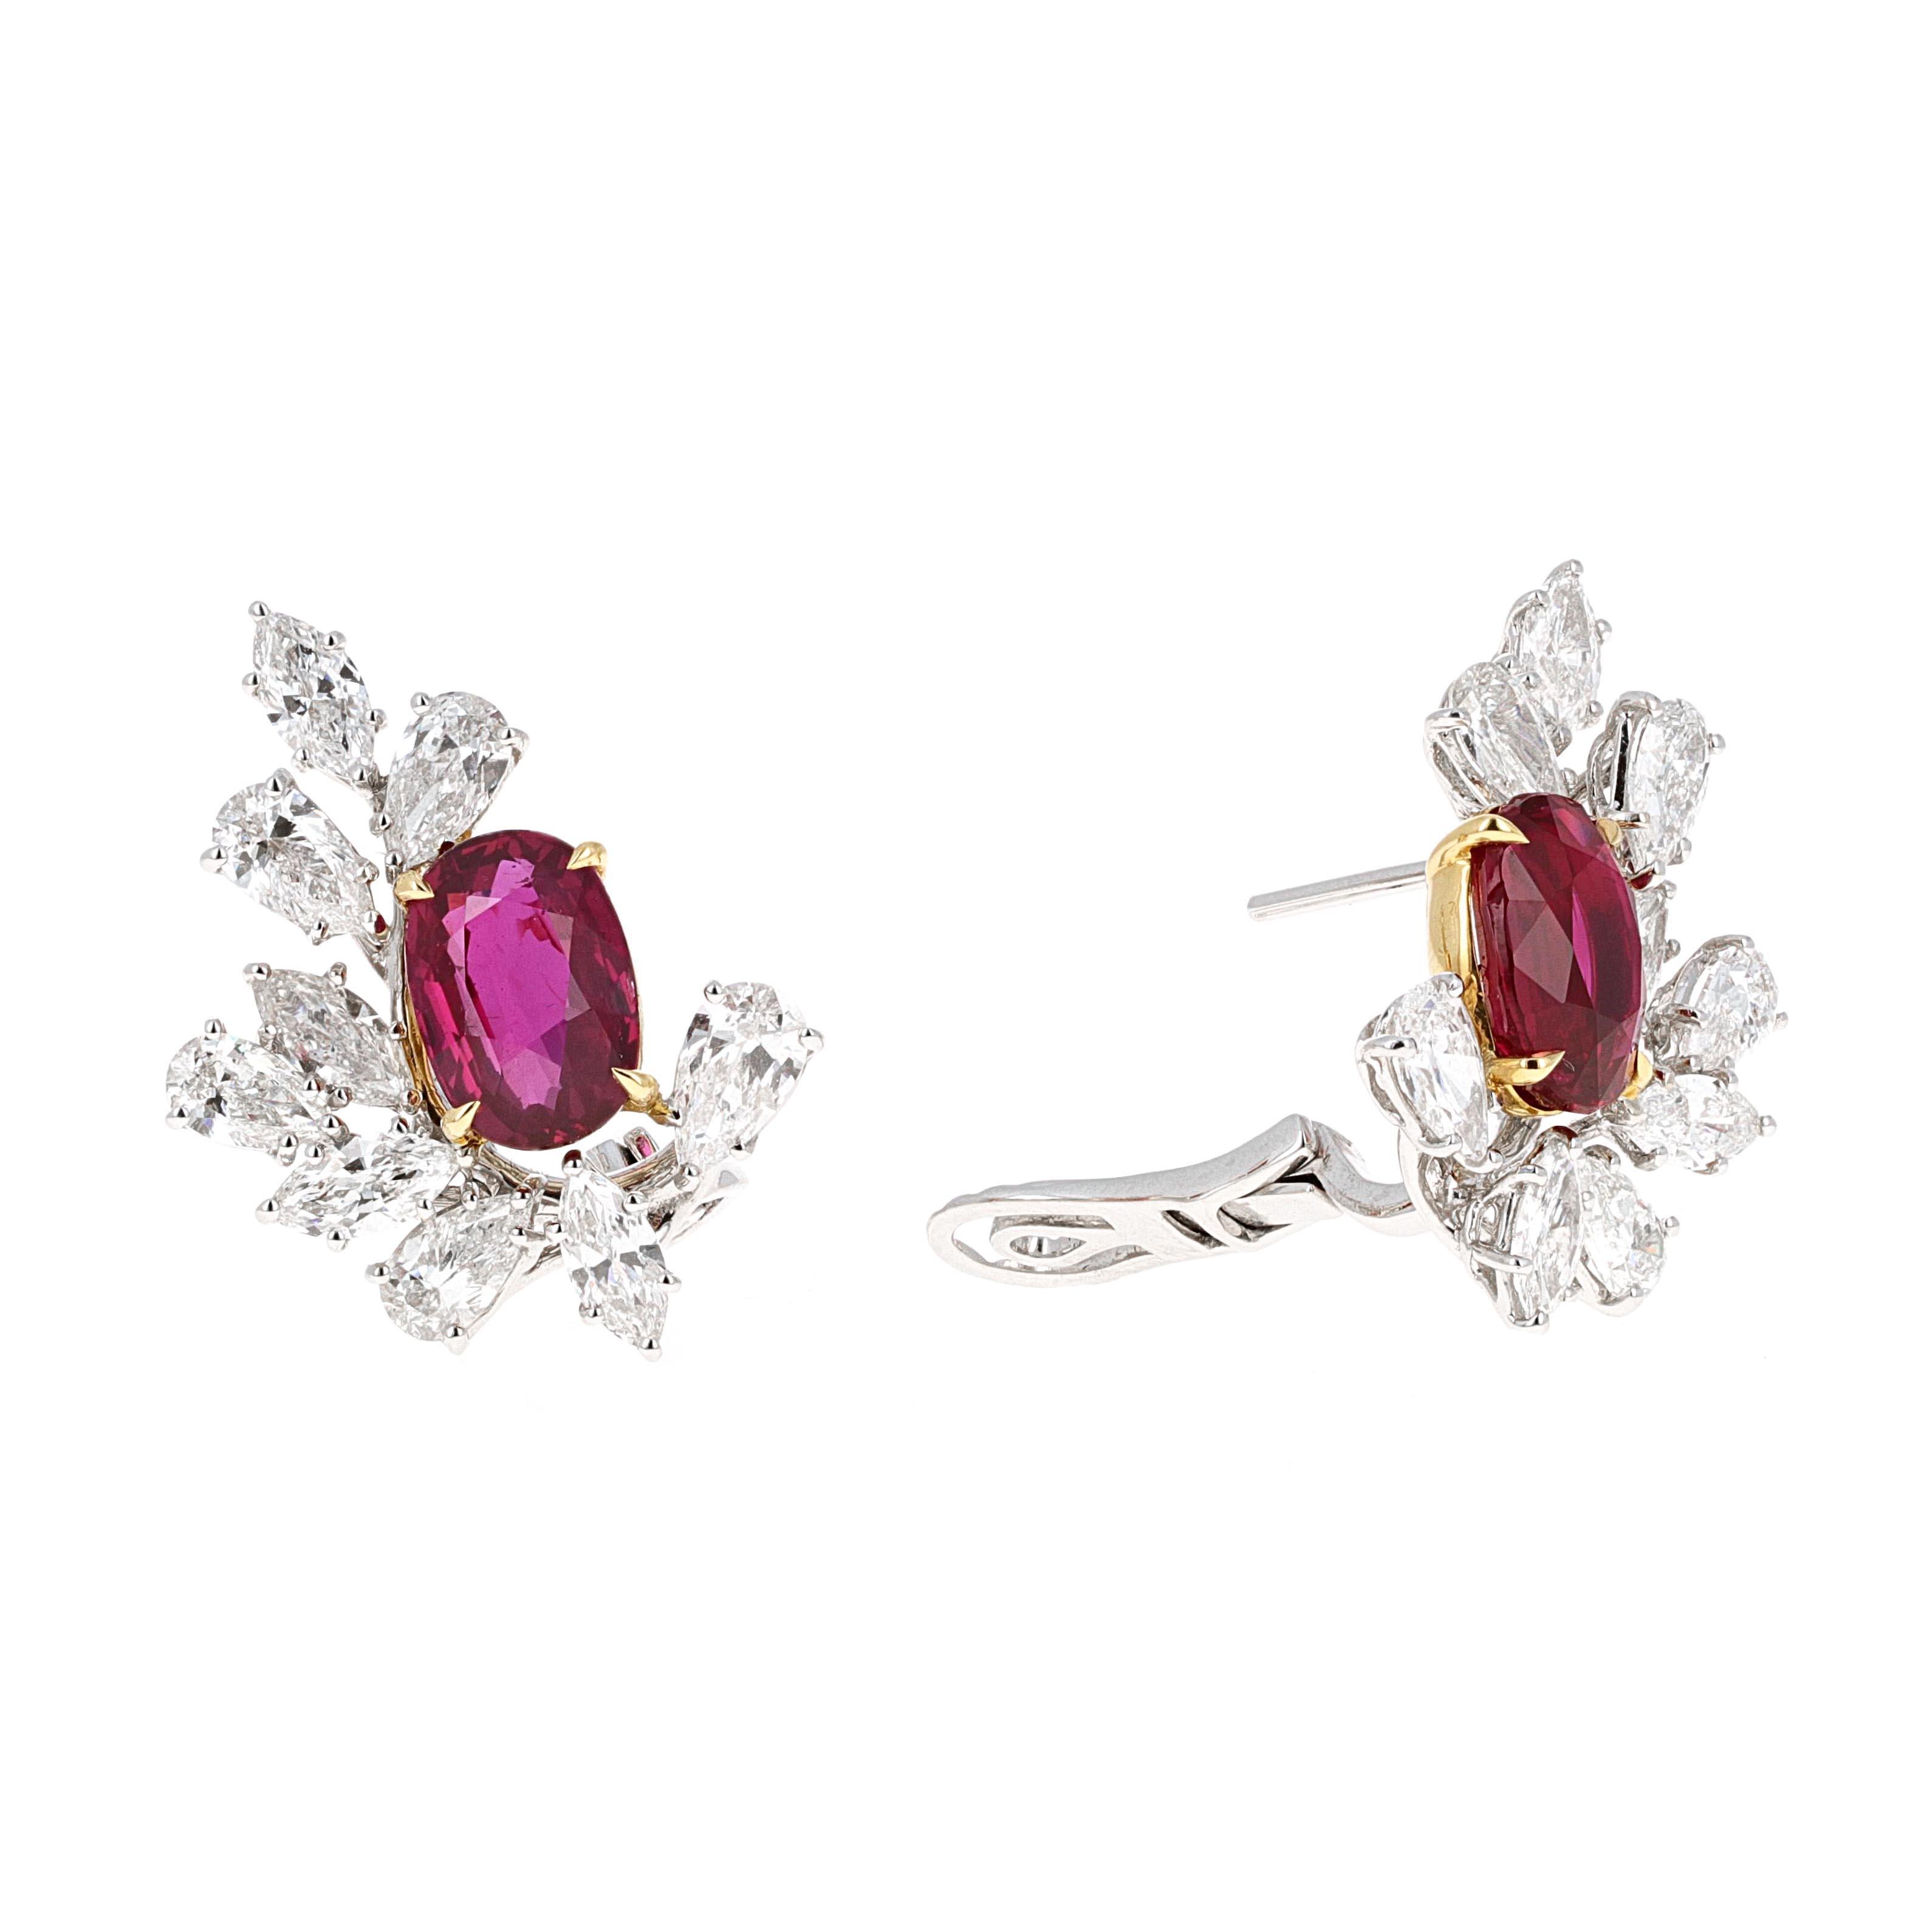 GRS Certified, 8.04 carat total weight ruby and diamond lever-back earrings. The earrings are made in 18 karat white and yellow gold.
Both rubies have been certified by the Gem Research Swiss Lab, GRS. Both gemstone reports state that the rubies are